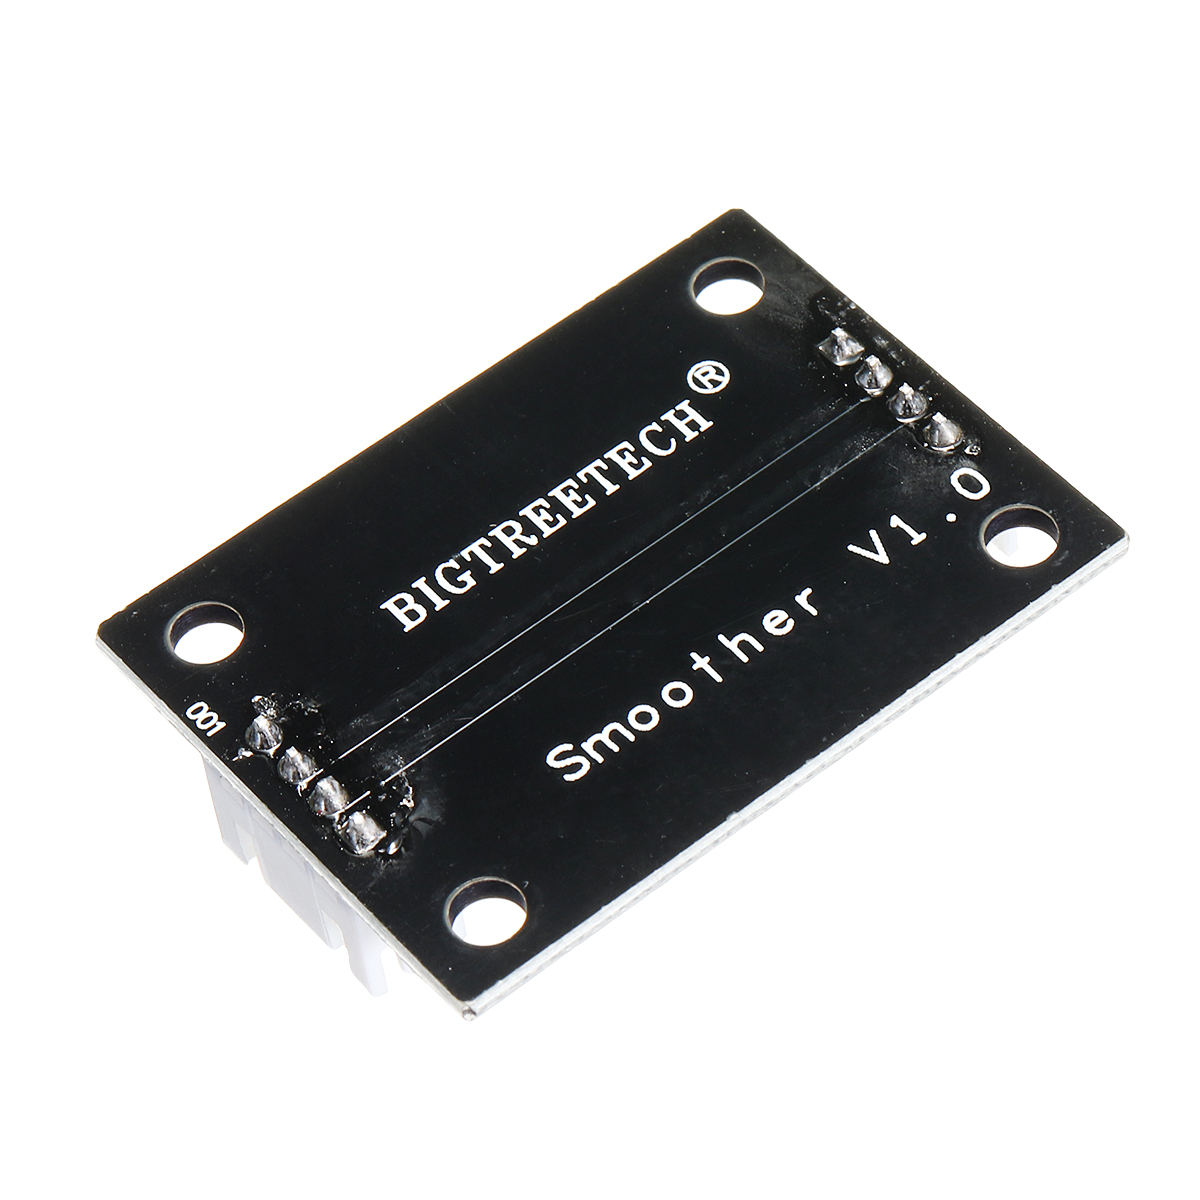 3PCS TL-Smoother Addon Module With Dupont Line For 3D Printer Stepper Motor 11